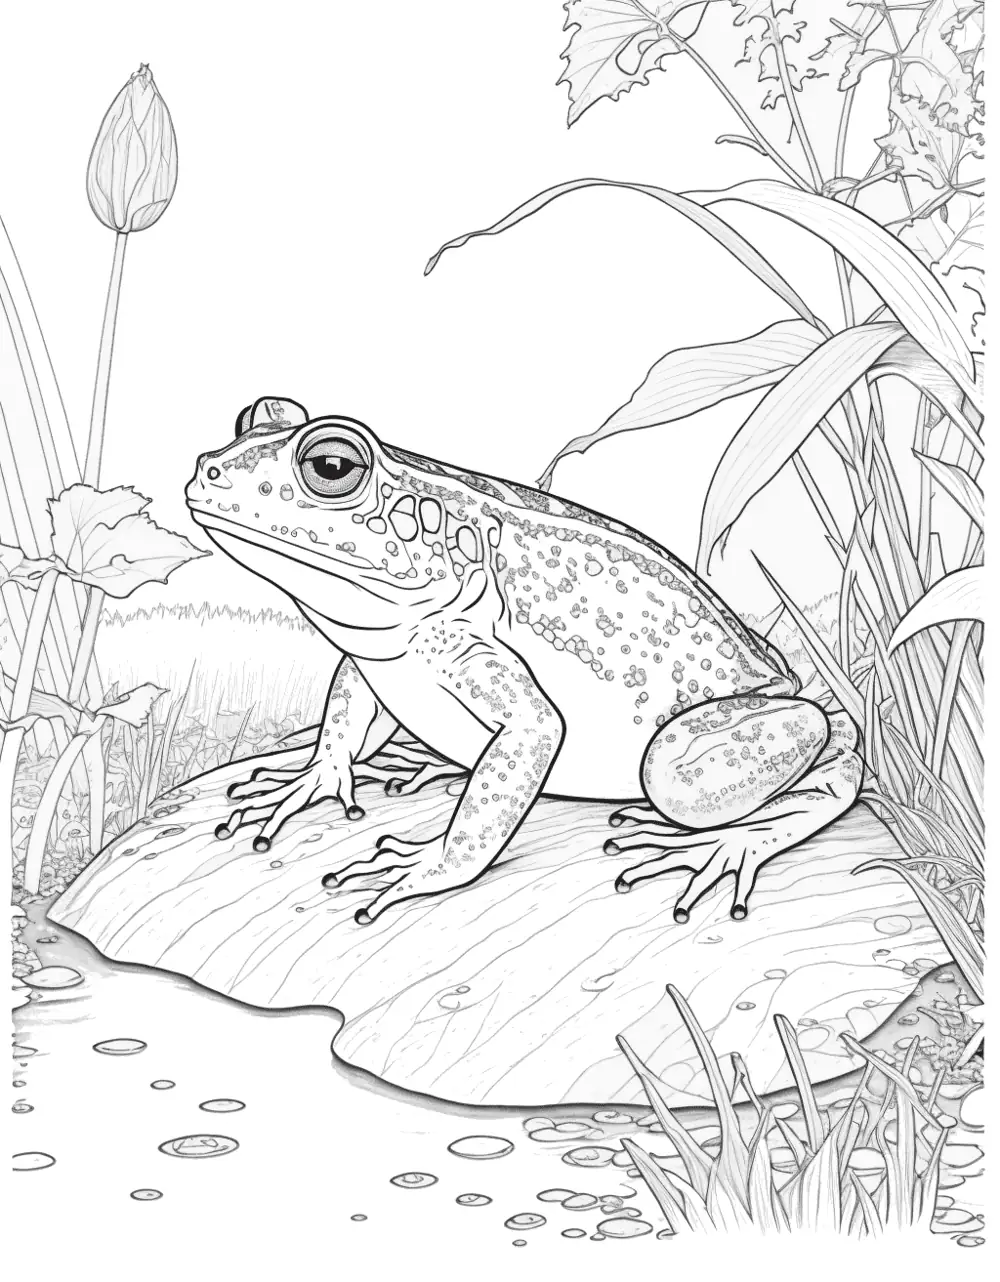 Realistic Frog In Nature Coloring Page - A realistically drawn frog in its natural habitat